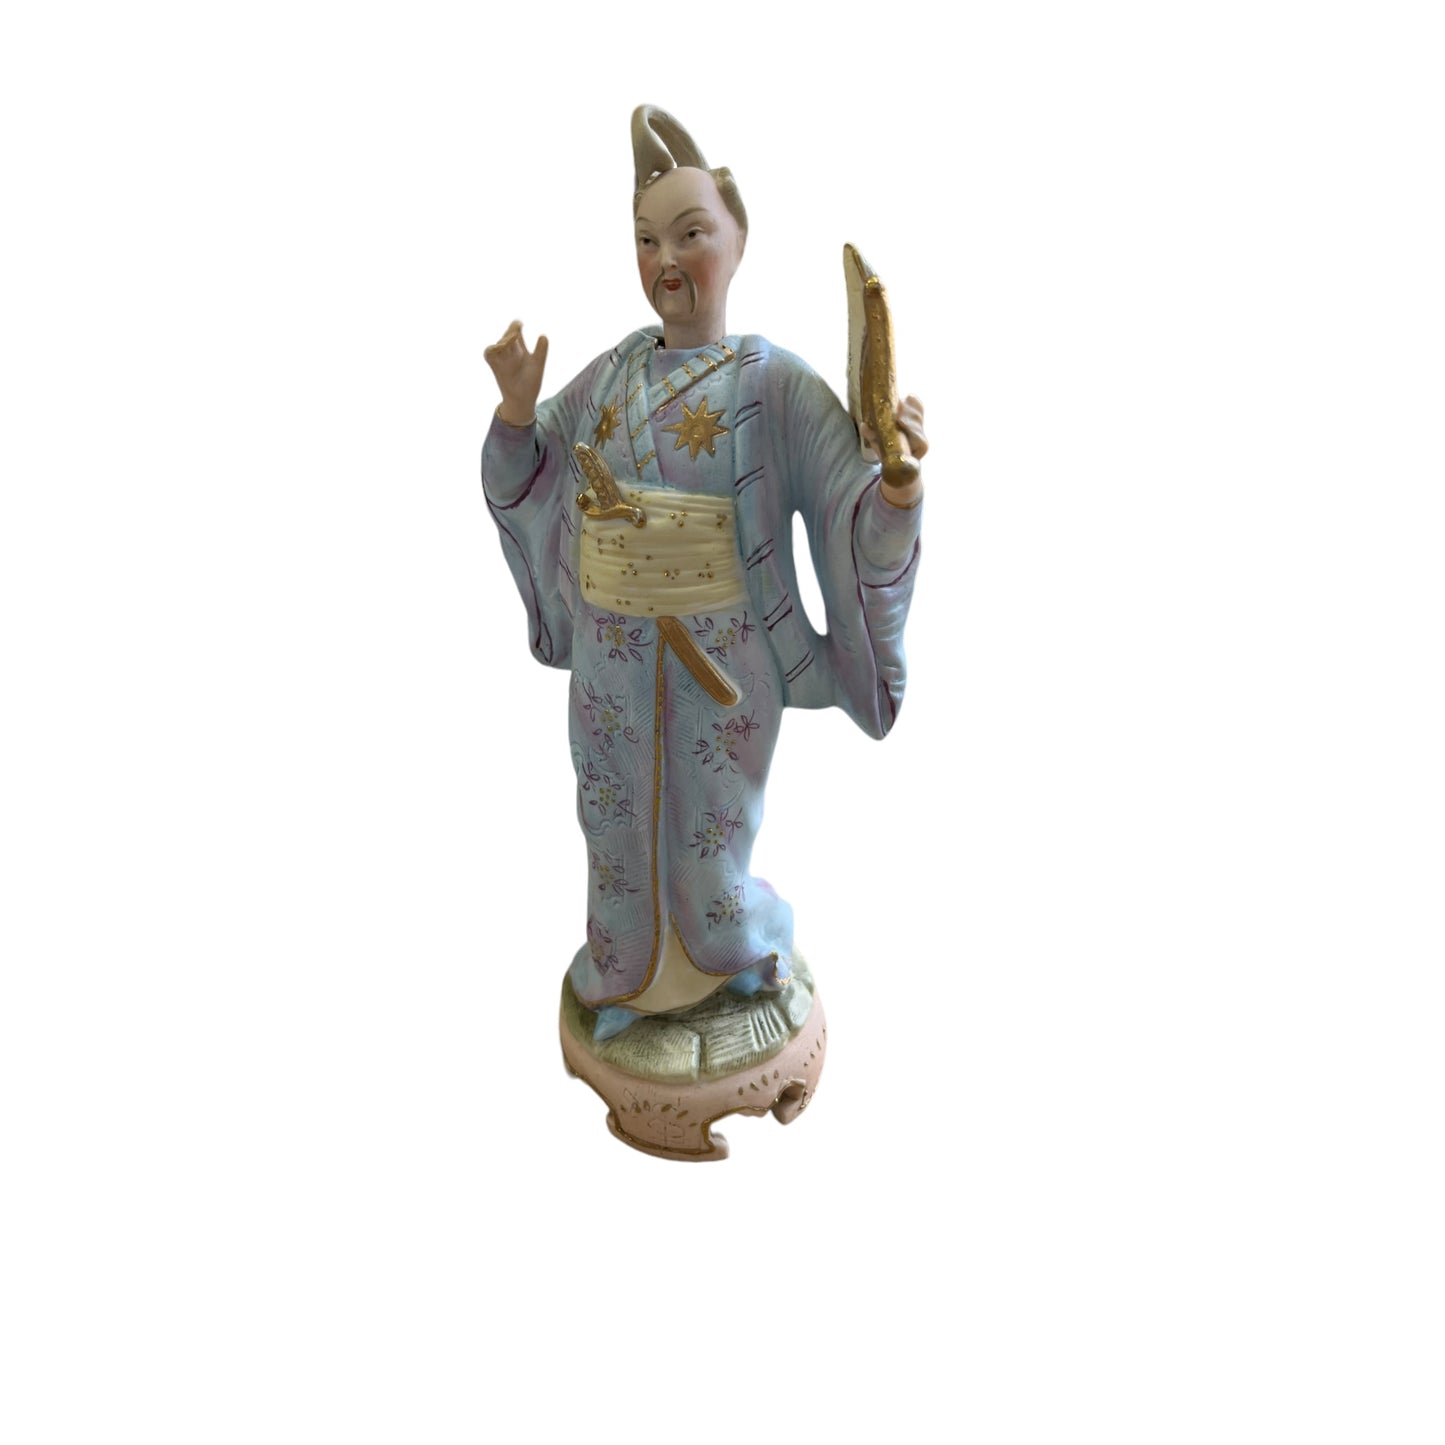 Chinese courtier in bisque porcelain with moving head 19th century